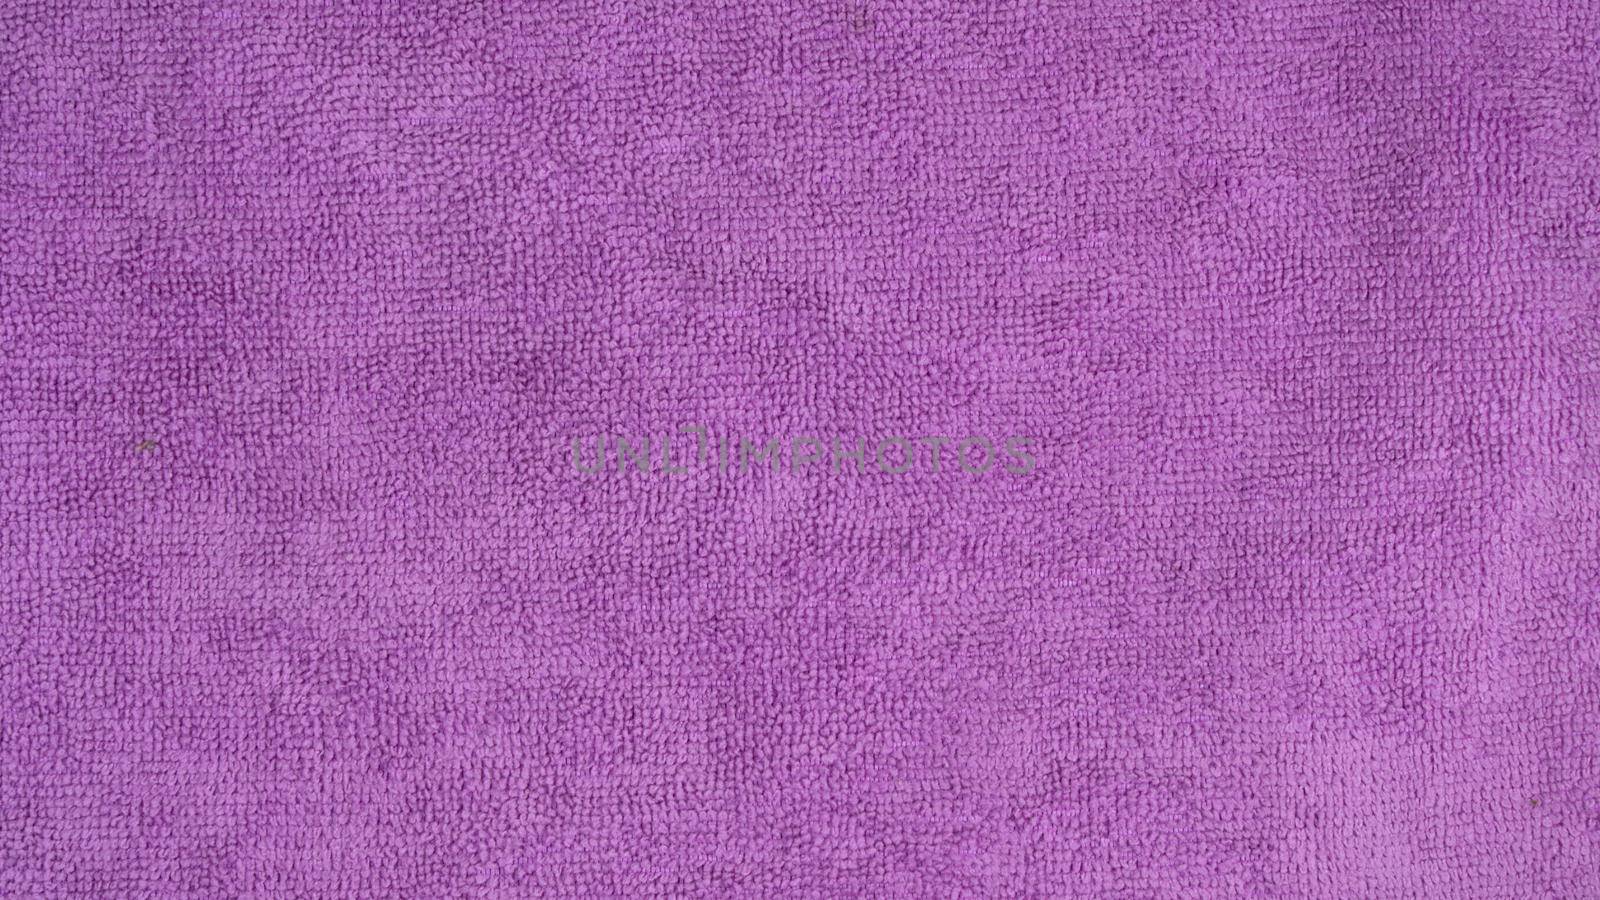 Purple Microfiber Texture Fabric Pile Background by voktybre